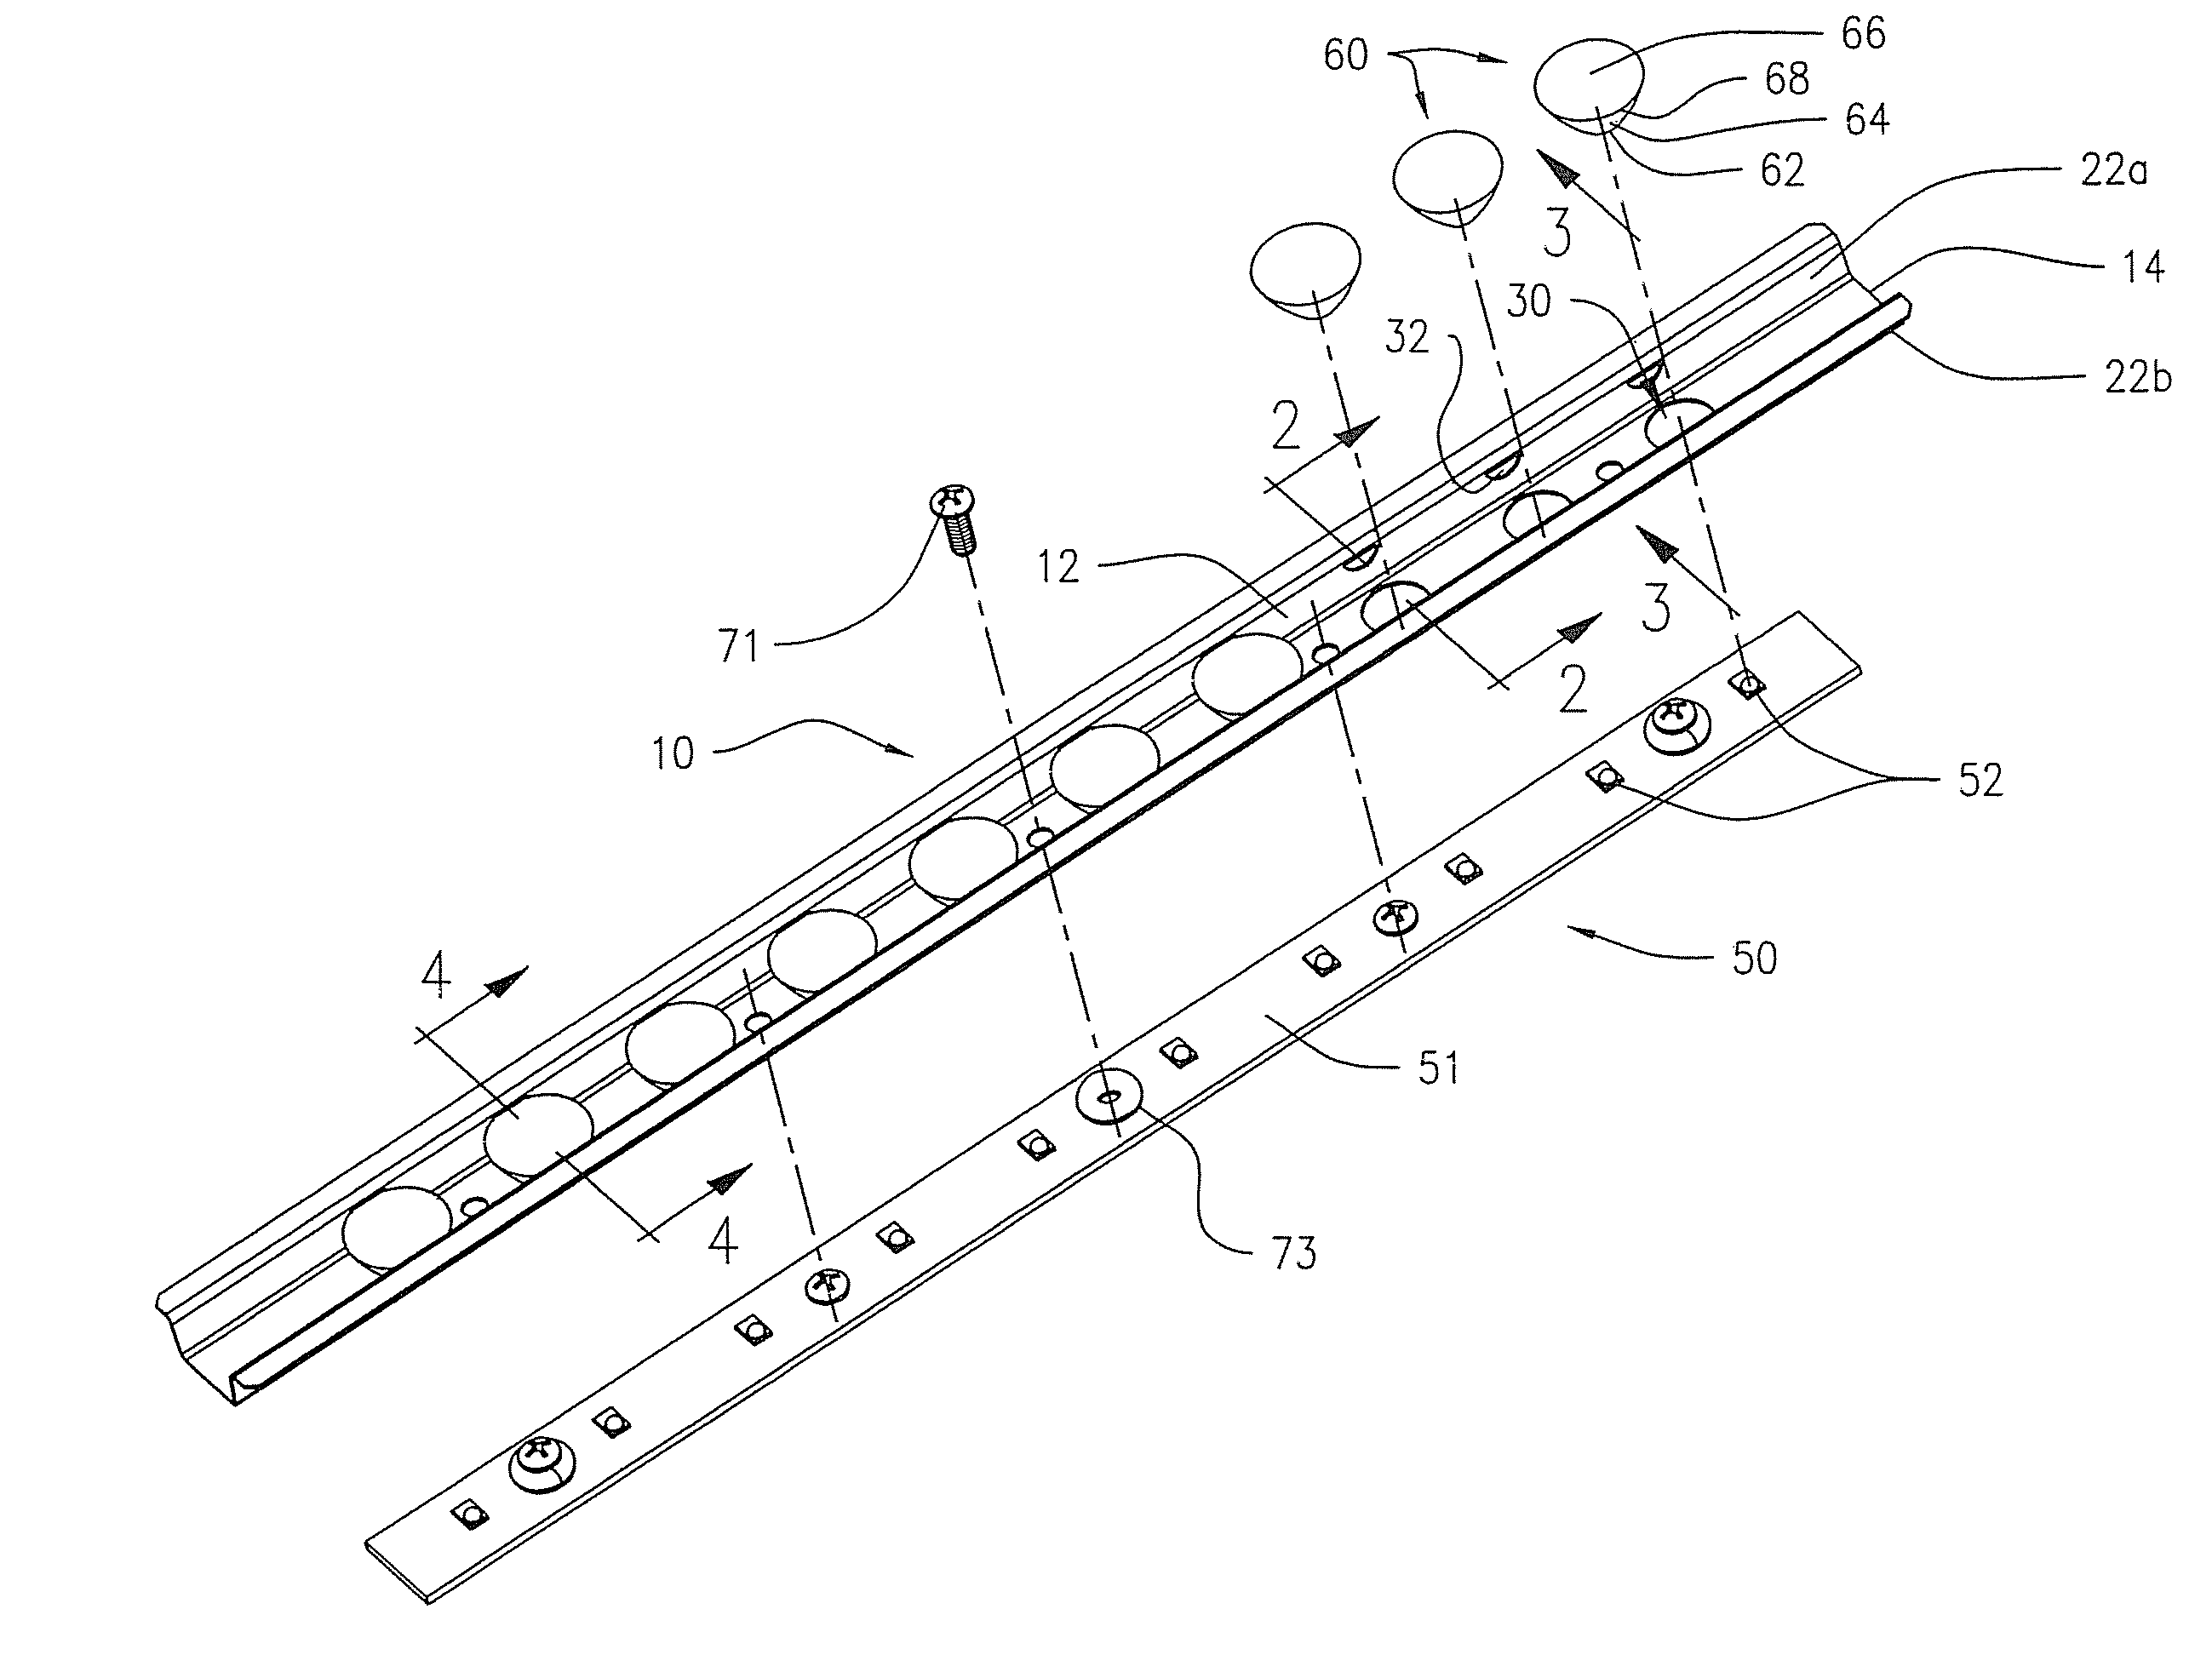 Optic positioning device